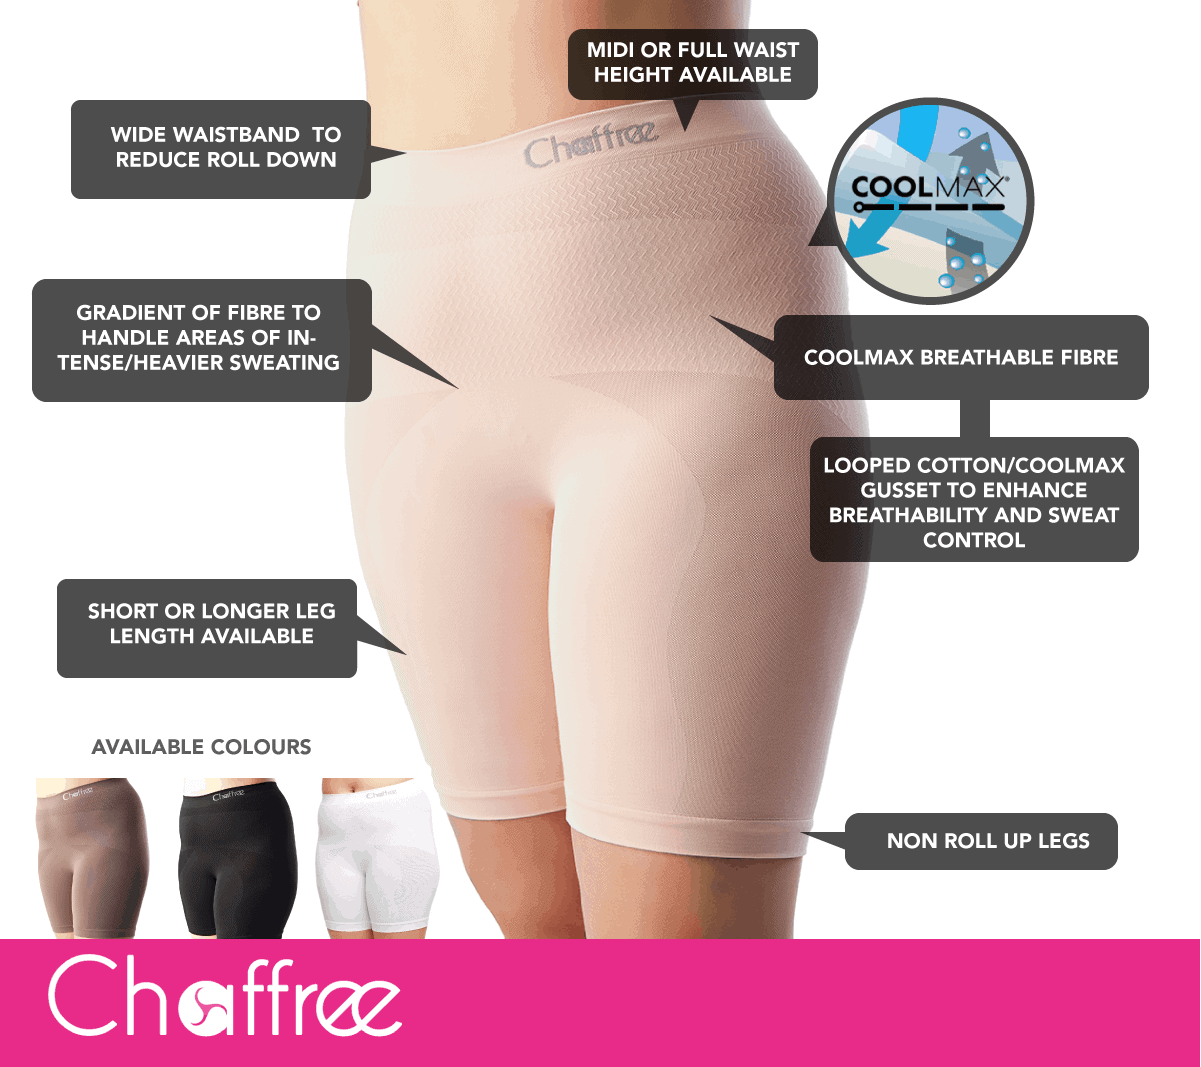 Chaffree Womens Anti Chafing Exercise Briefs, Ladies Mid Waist Underwear  Brief Panties Active Fit, Breathable Sweat Control, Stretchy Seamless  Pants